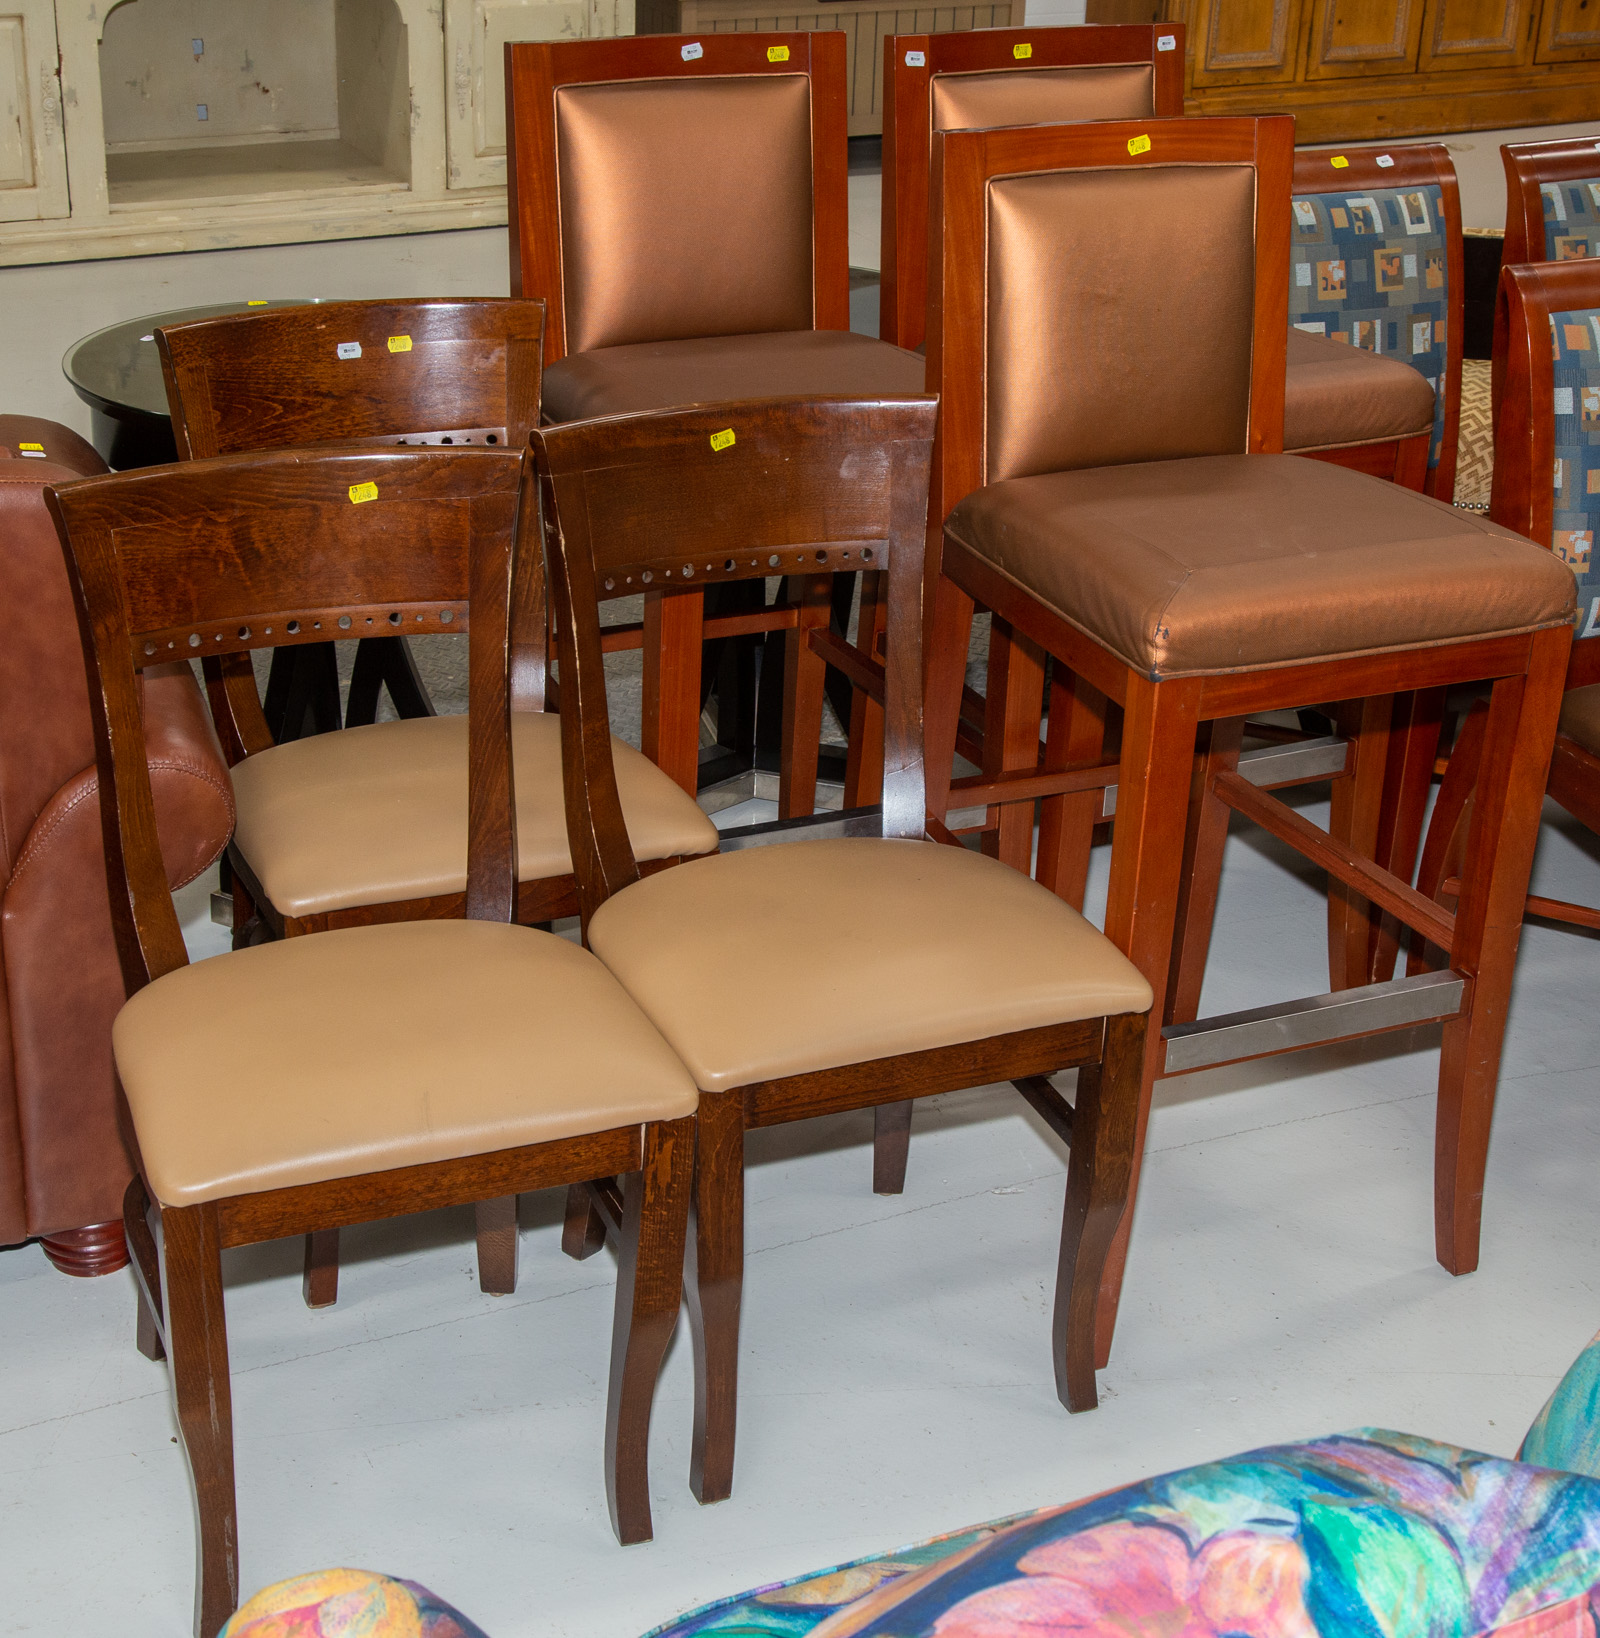 SIX CONTEMPORARY CHAIRS Comprising 2896a3